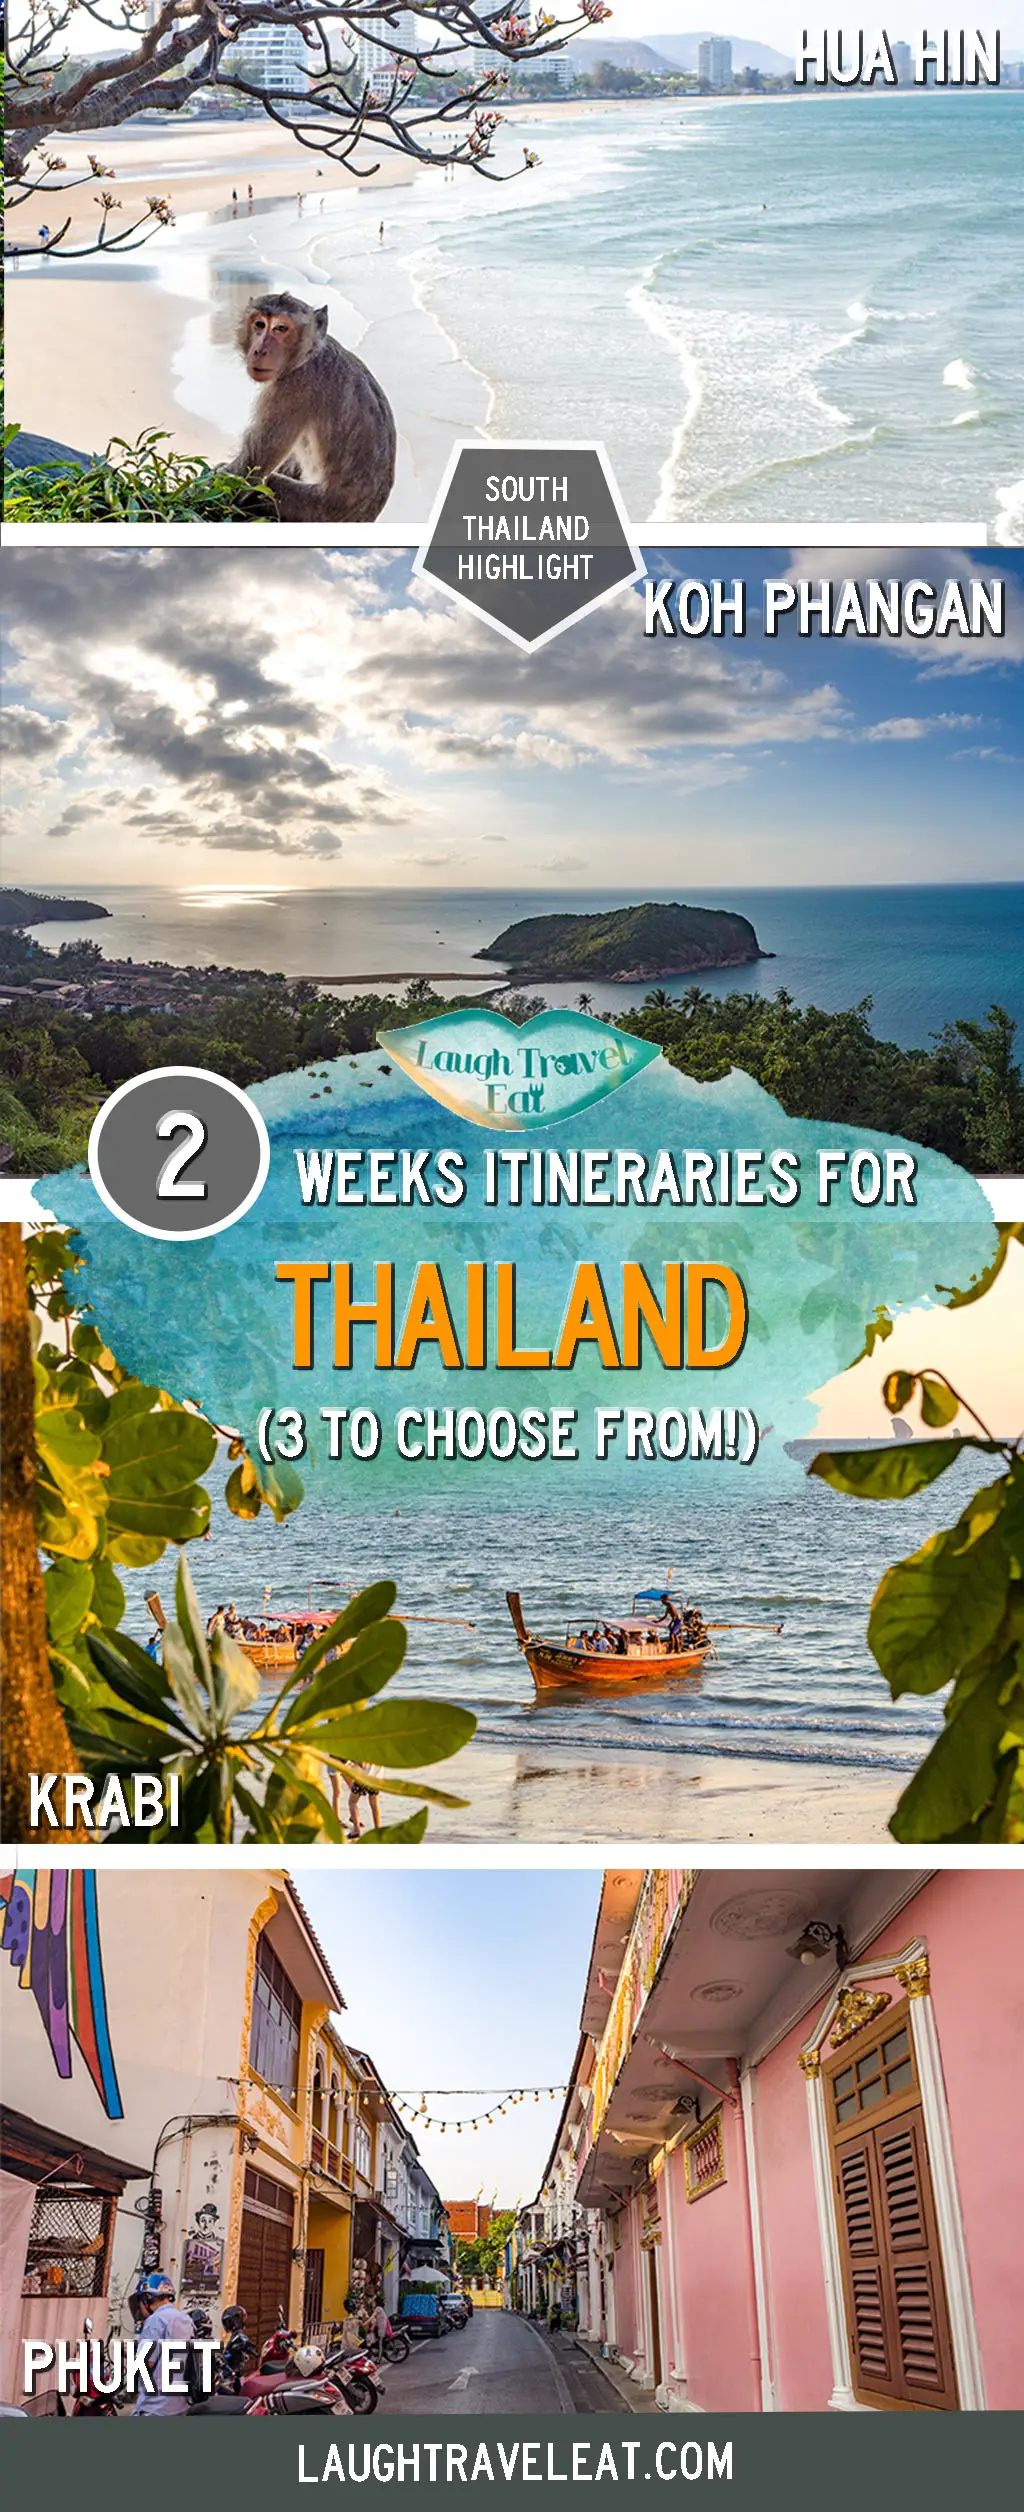 Thailand is one of the most popular countries to backpack and two weeks would be enough time to see some highlights! Arguably the best country for both beginner and experienced backpackers, you can meet like minded travelers in cultural and foodie cities or go off the beaten path and experience the local life or natural sights. Whether you enjoy Here are a few two week itineraries for you: #Thailand #itinerary #backpacking